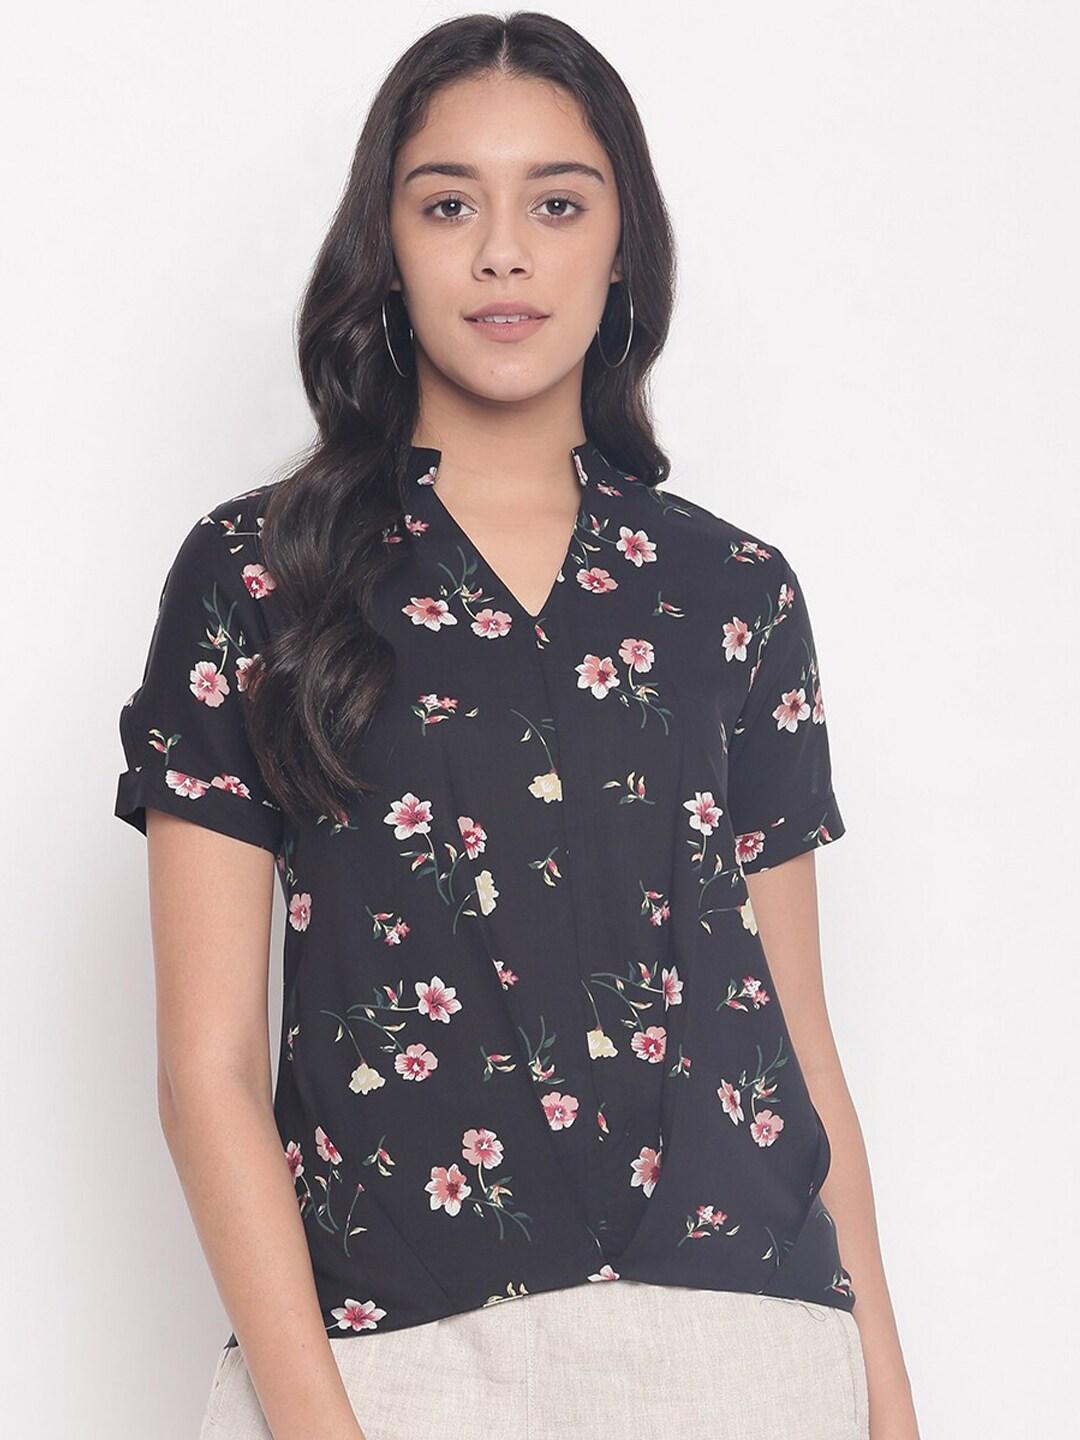 Miss Grace Floral Printed V-Neck Short Sleeves Shirt Style Top